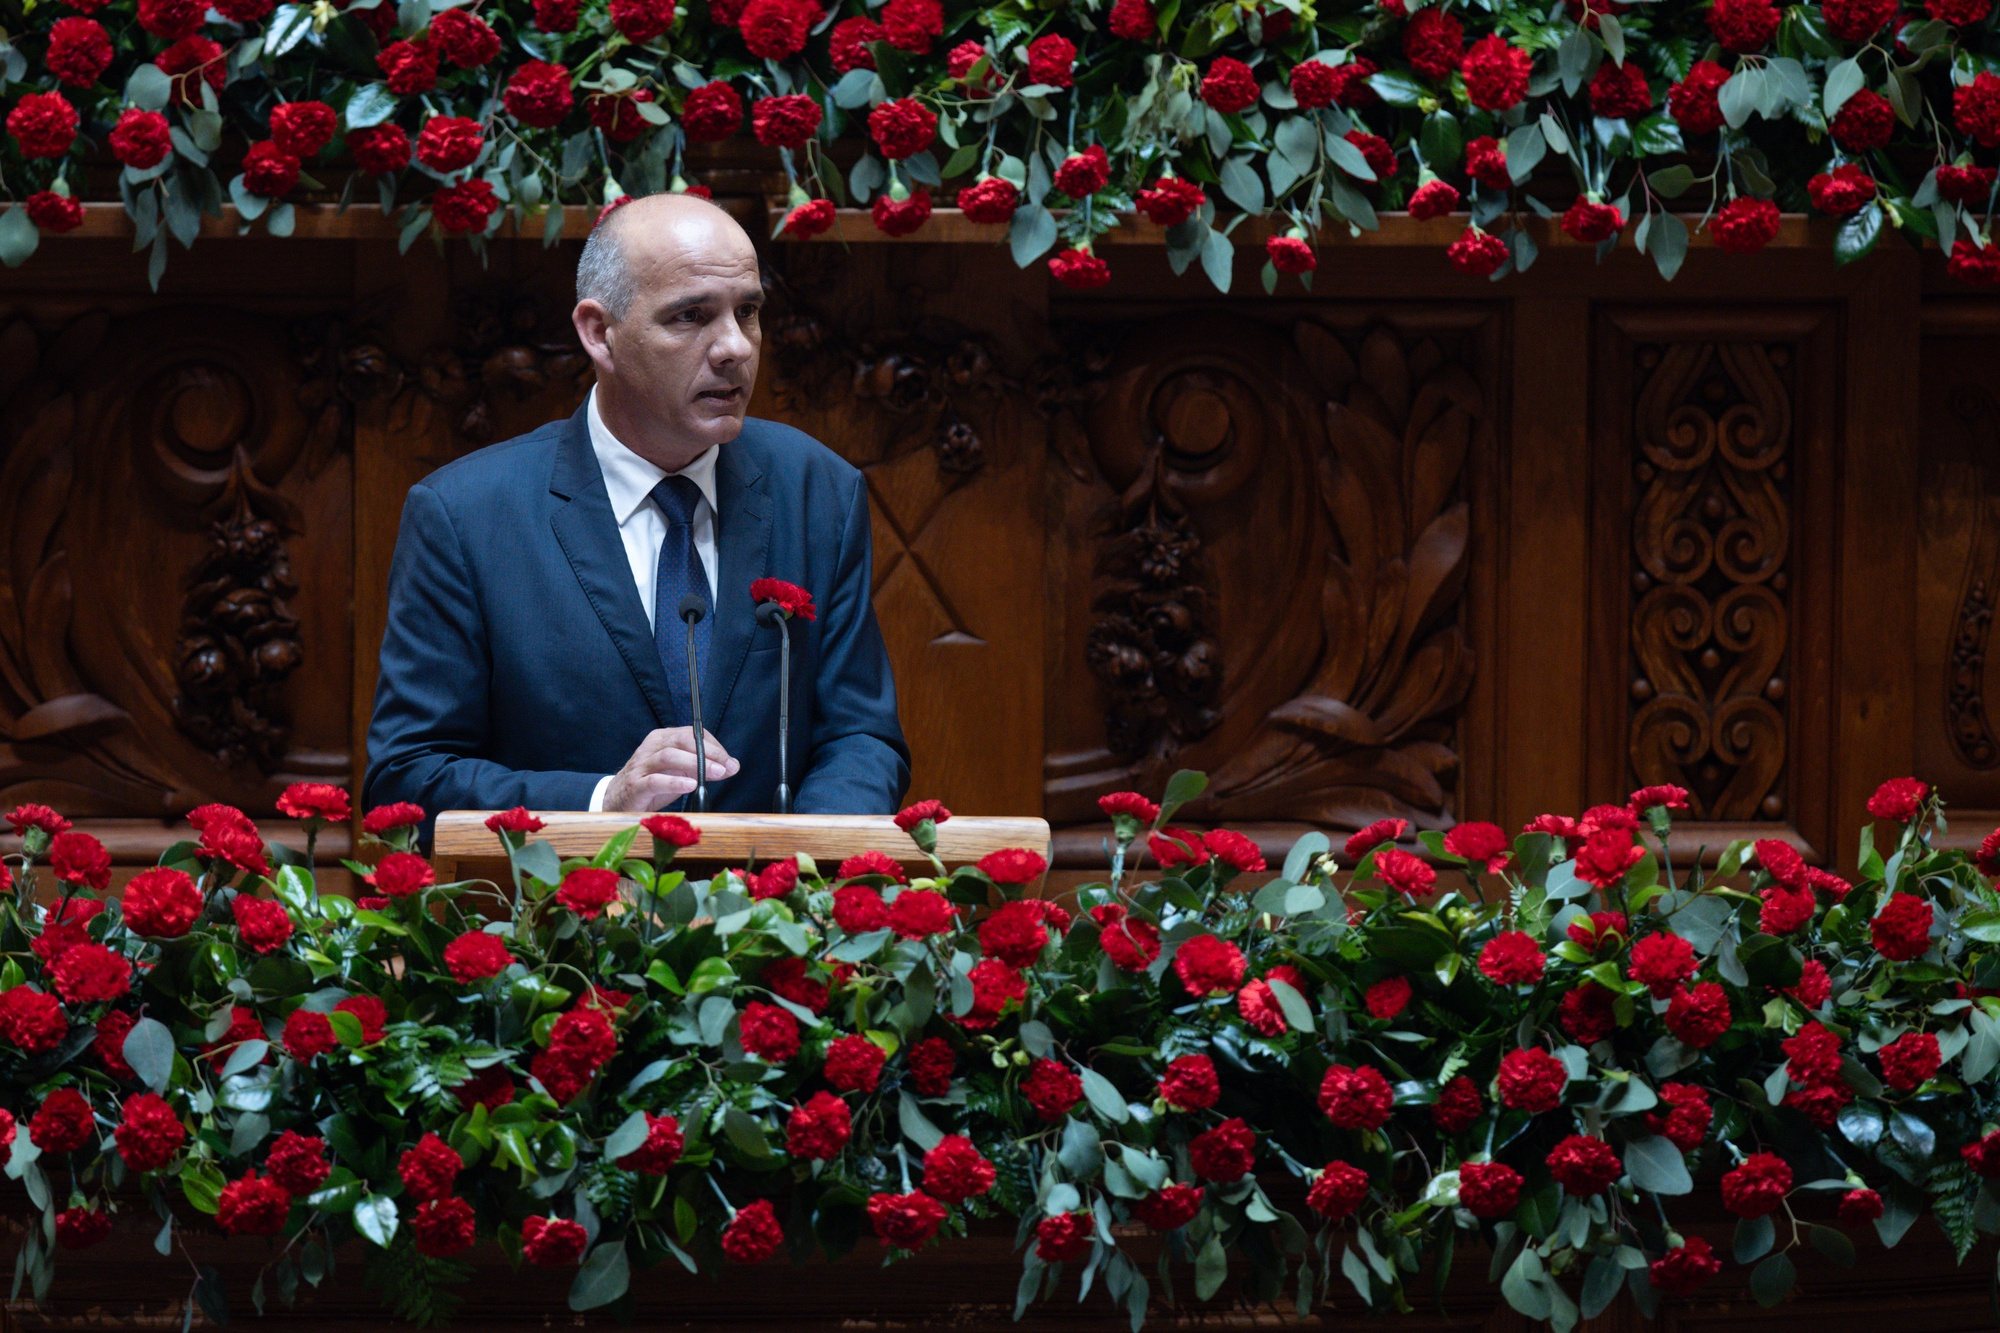 The leader of the Portuguese Communist Party (PCP), Paulo Raimundo, delivers a speech during the solemn comemorative session at the Portuguese parliament in Lisbon, Portugal, 25 April 2024. Portugal celebrates the 50th anniversary of the Carnation Revolution that ended the authoritarian regime of Estado Novo (New State) that ruled the country between 1926 to 1974. JOSE SENA GOULAO/LUSA